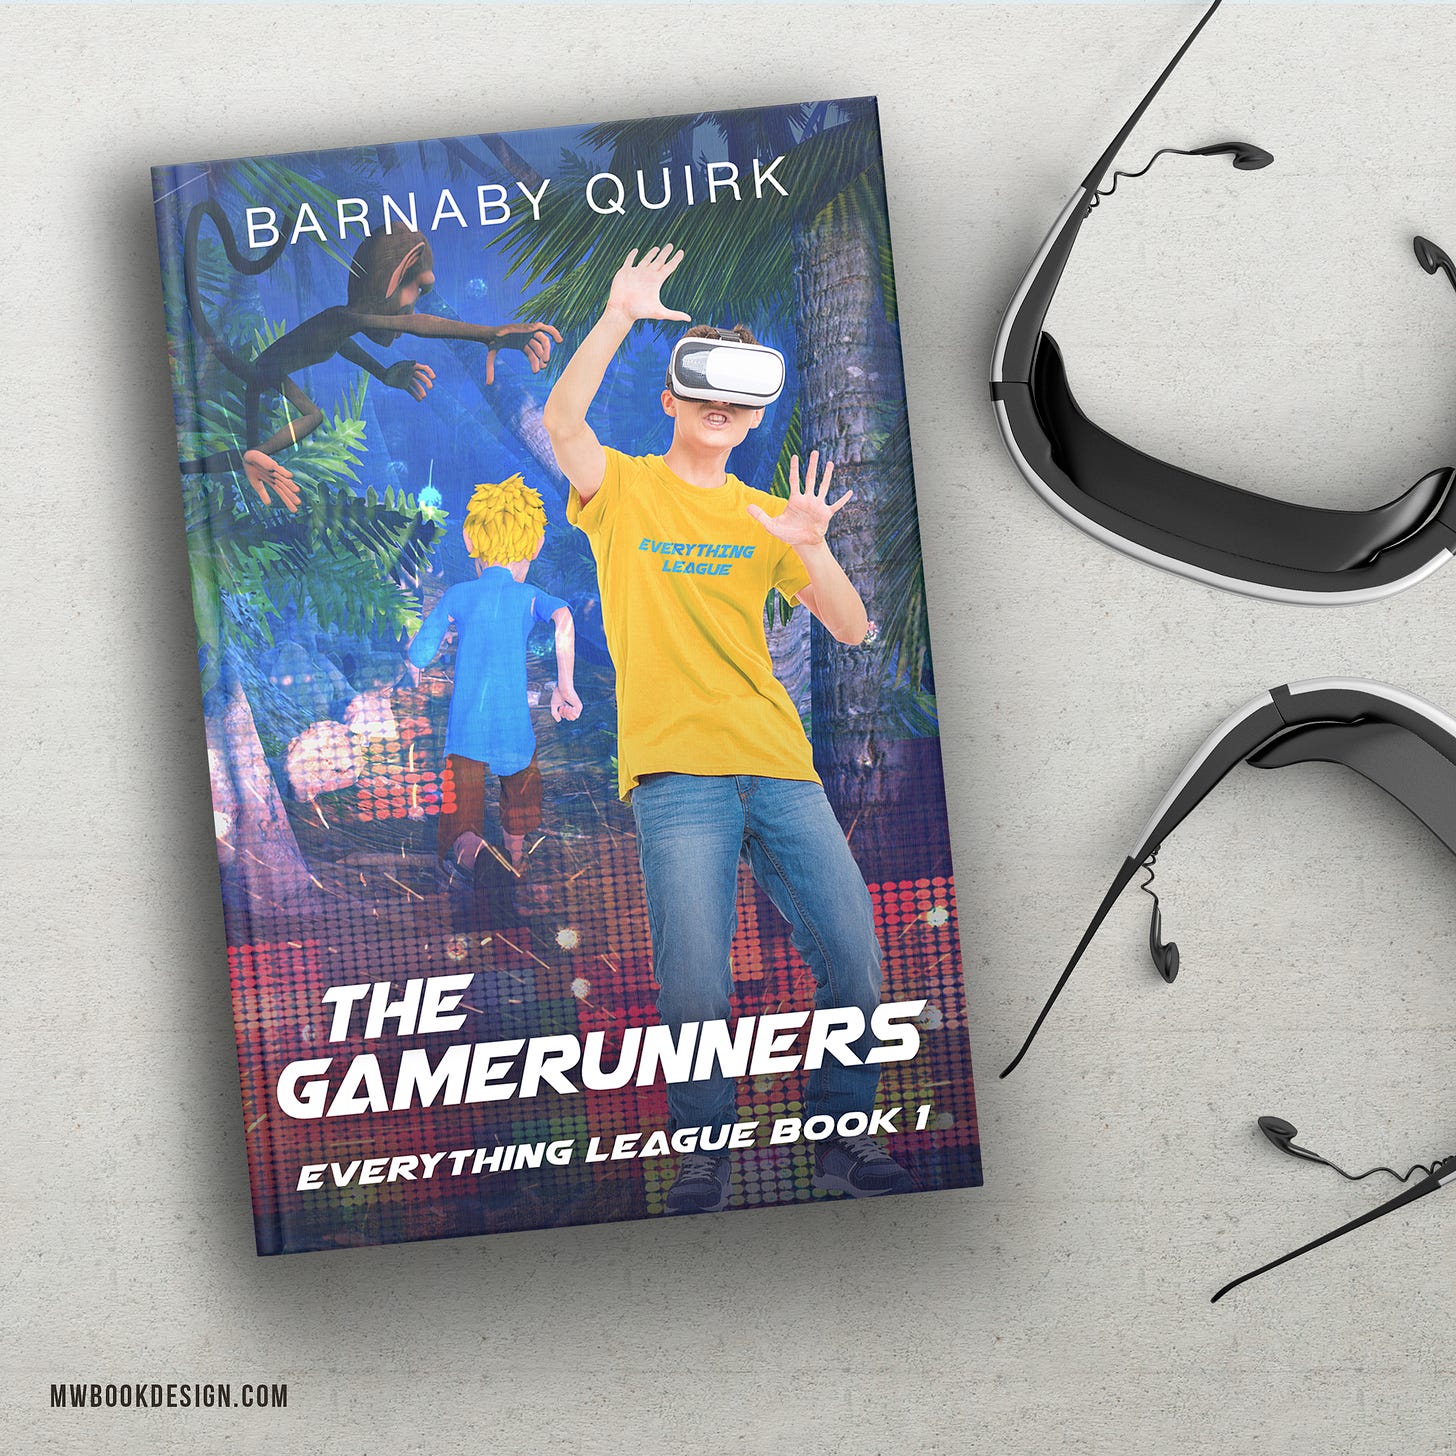 The Gamerunners by Barnaby Quirk